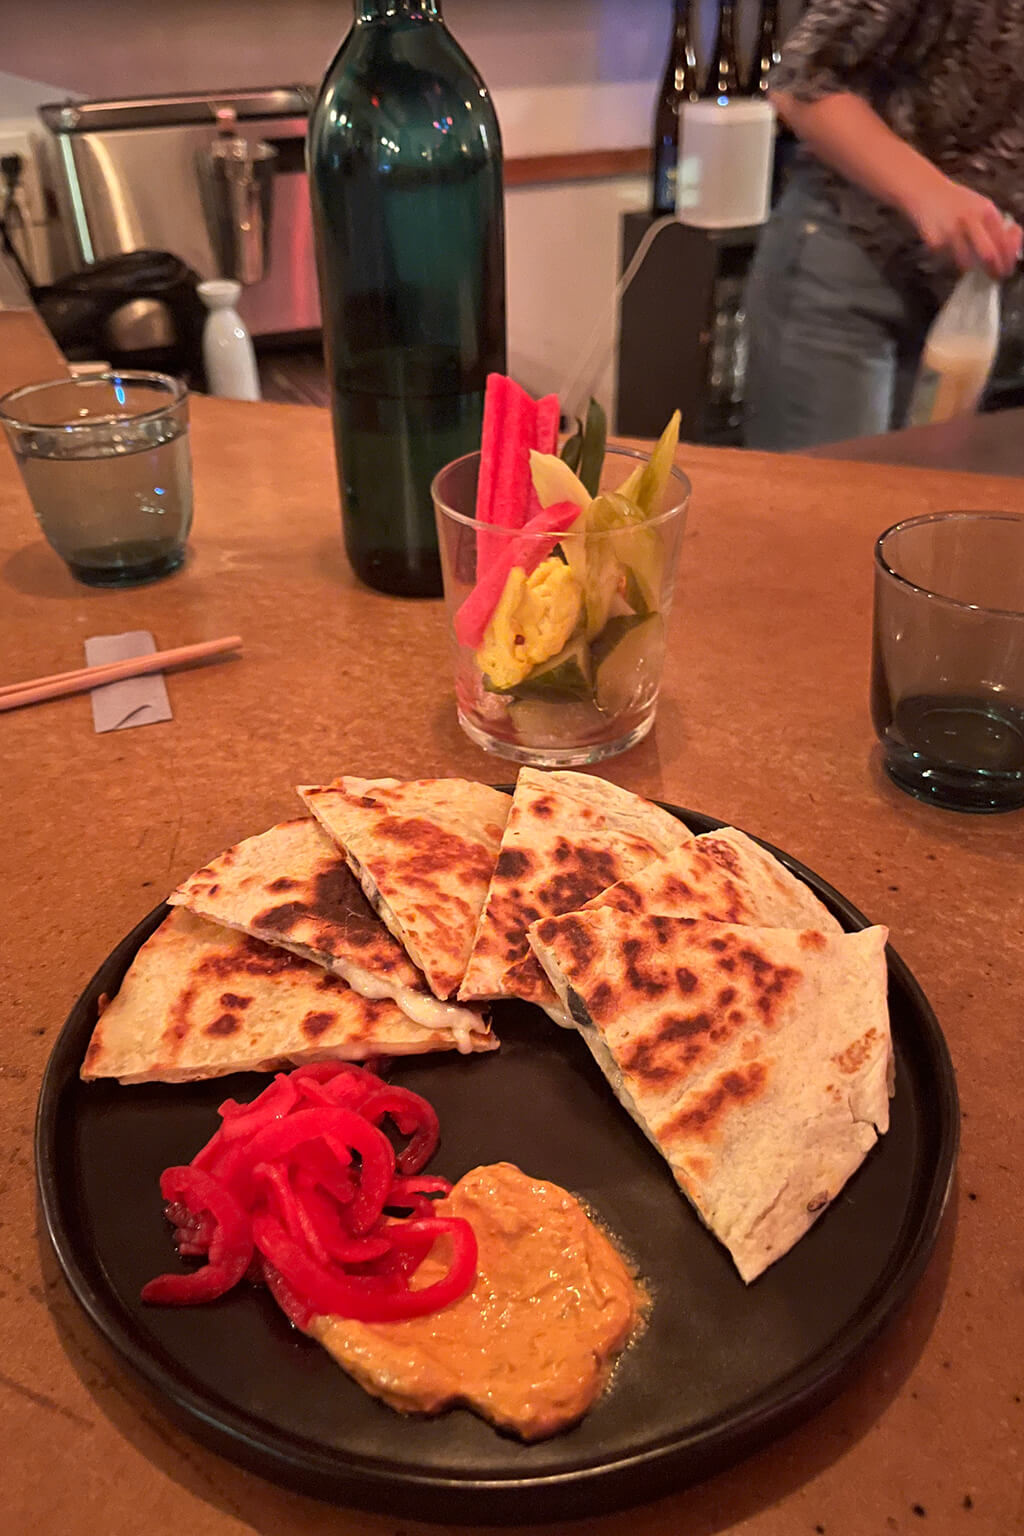 The huitlacoche quesadilla is made with mozzarella cheese and nori, served with pickled red onions and spicy mayo.